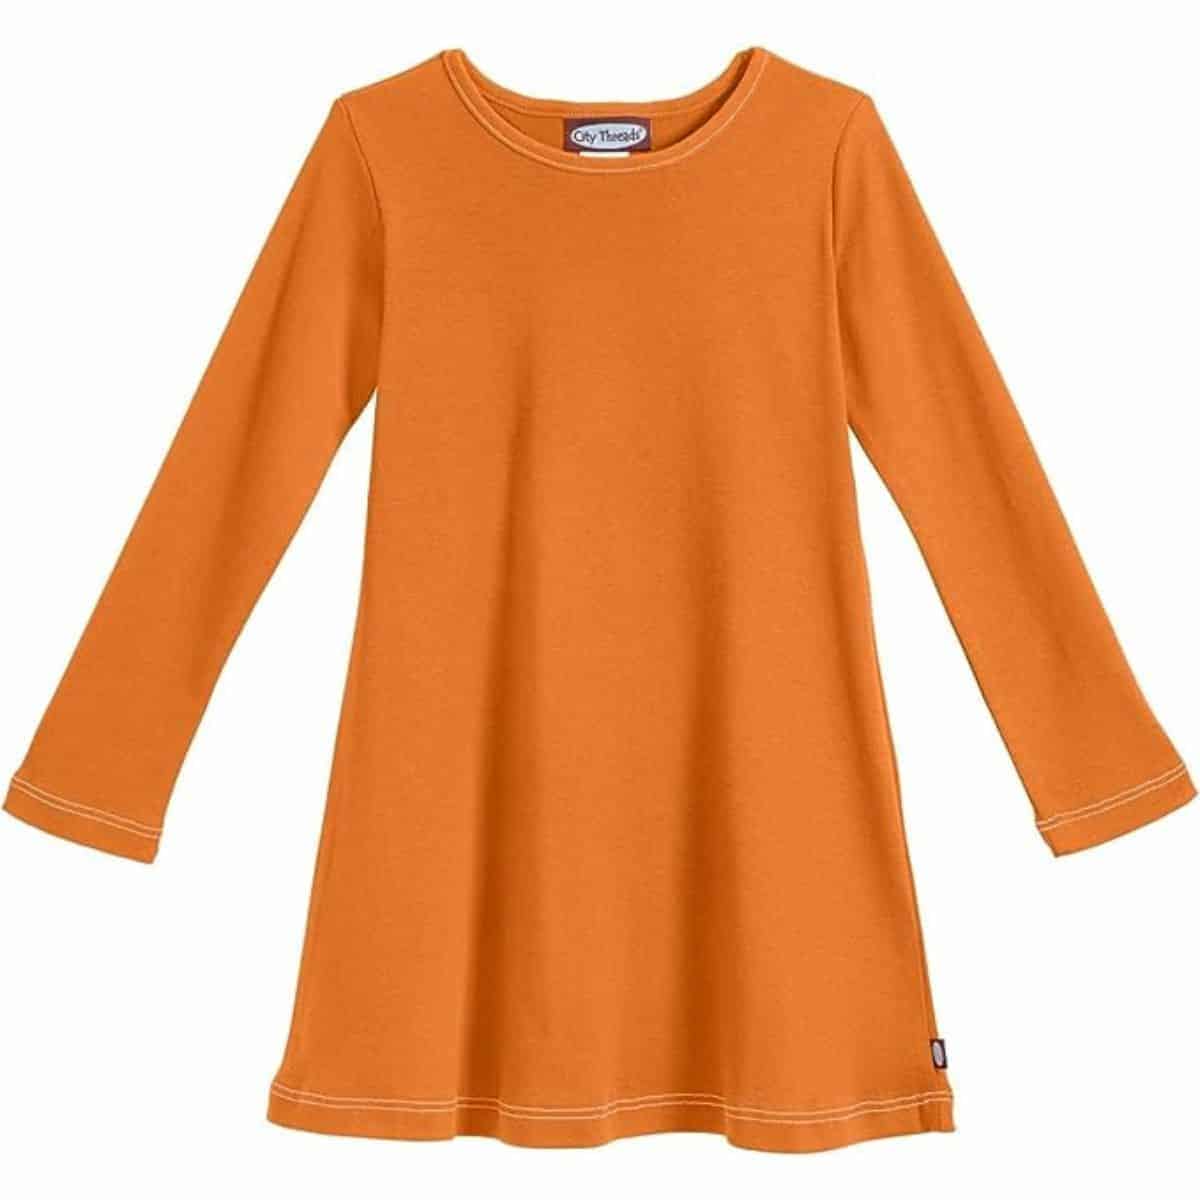 Sensory clothing sensitivities can make getting dressed stressful for kids and adults. Find sensory friendly clothing for all types of tactile sensitivities, for kids and adults!